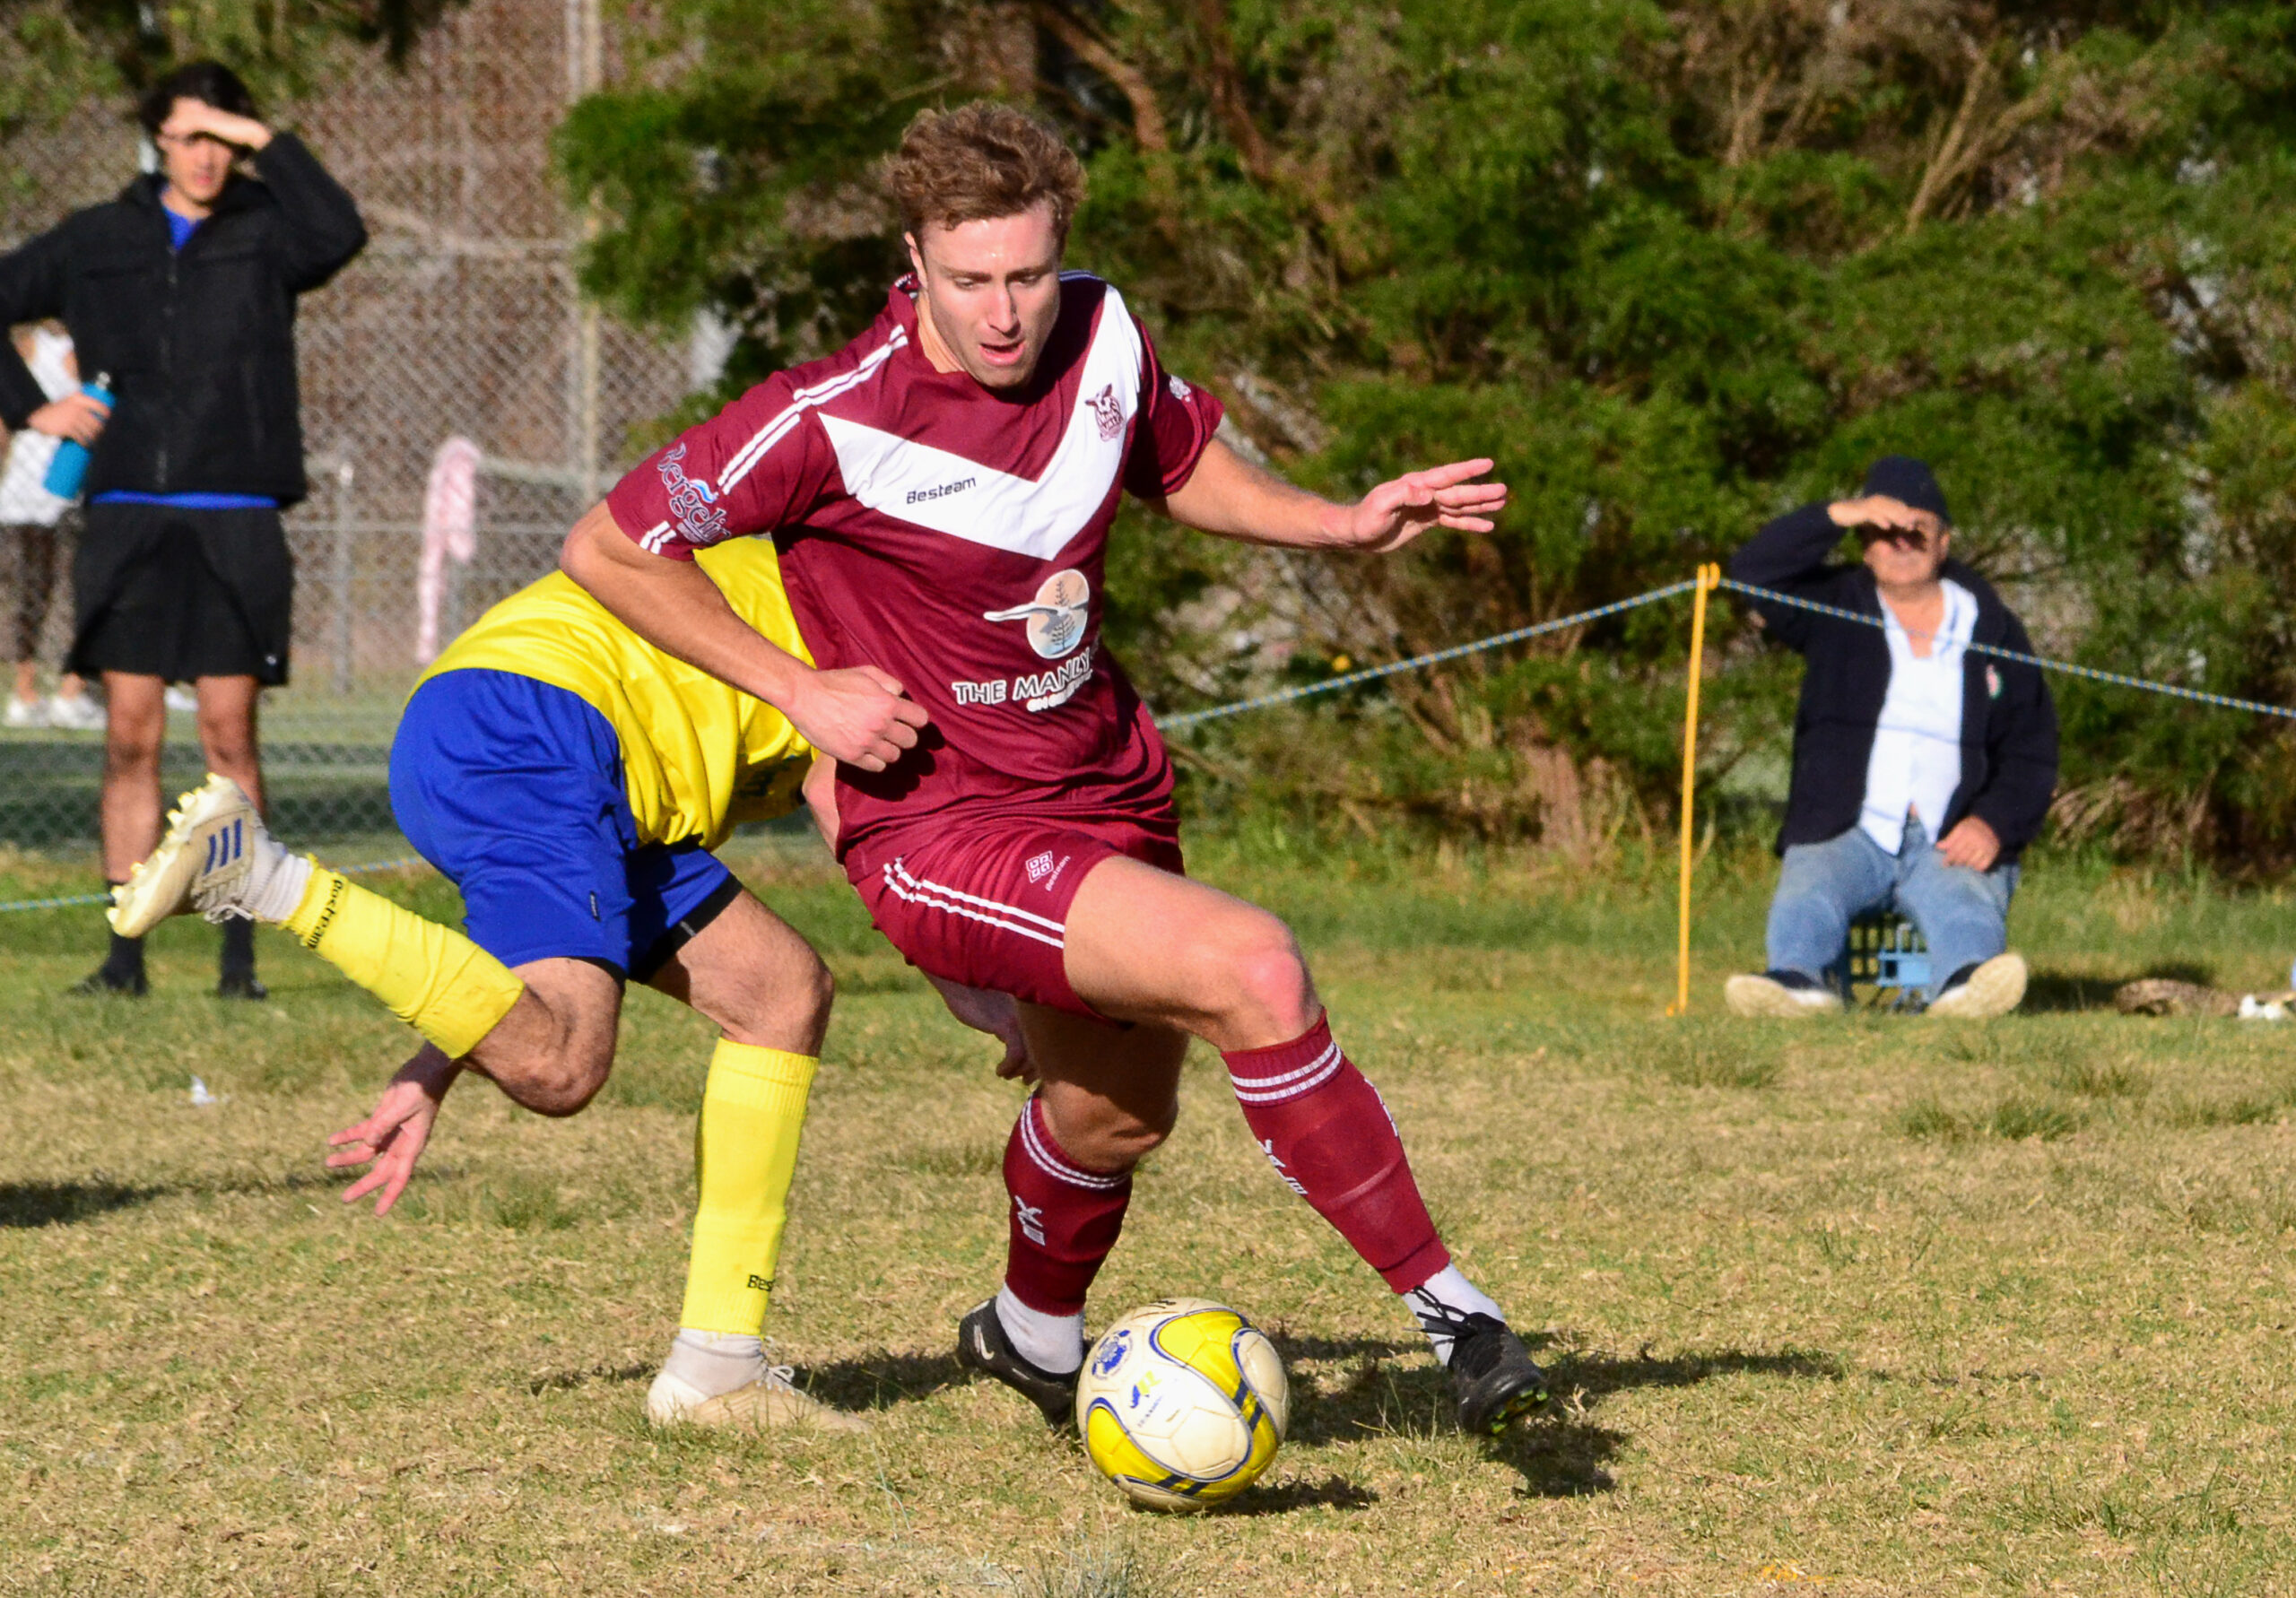 Men's Premier League Round 16: Action from the 2023 MWFA Men's Premier League Round 10 game between BTH Raiders and Manly Vale. Photo credit: Graeme Bolton